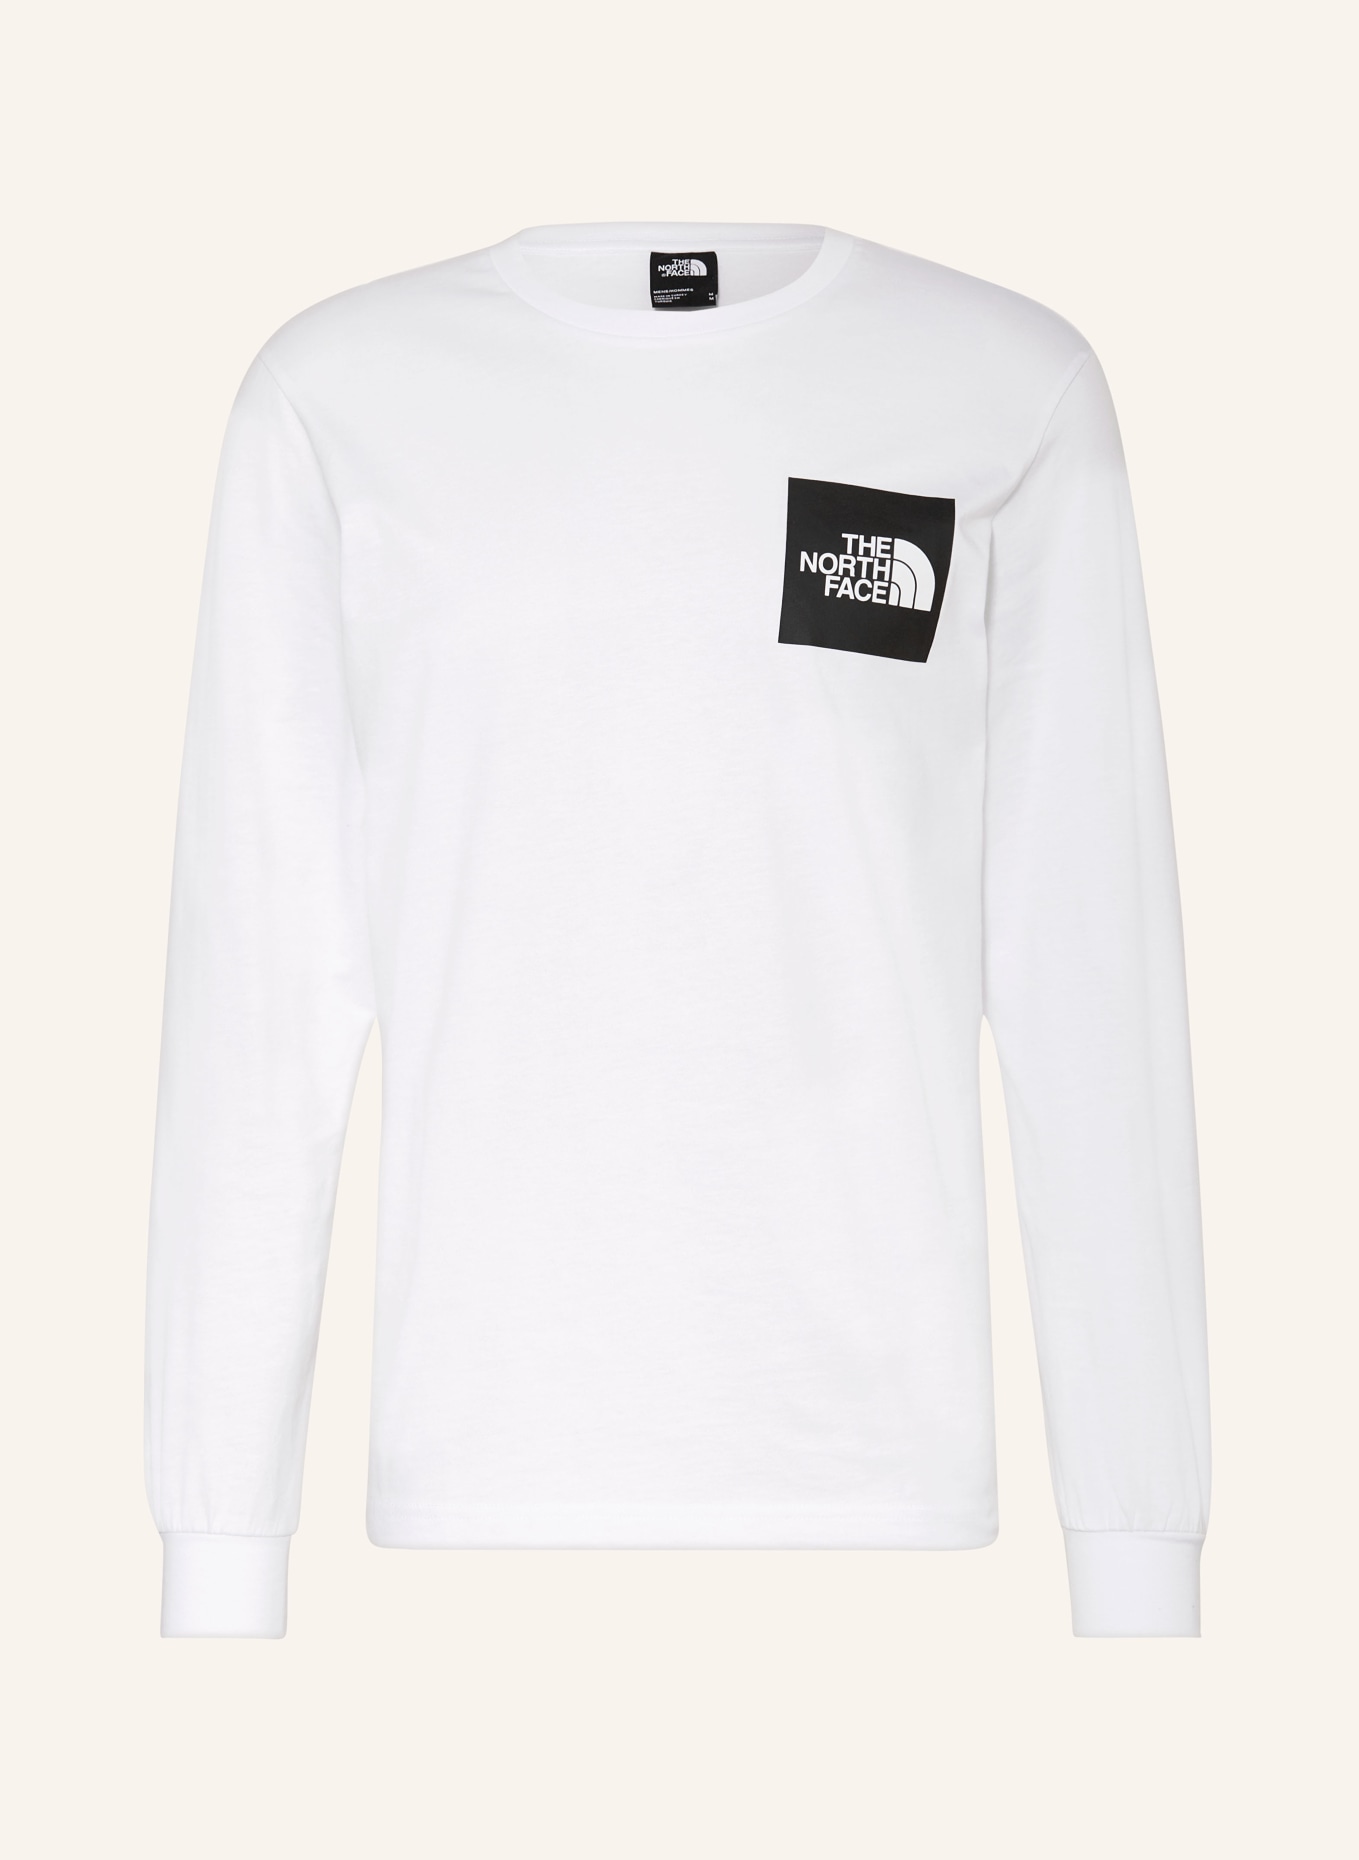 THE NORTH FACE Longsleeve, Farbe: WEISS (Bild 1)